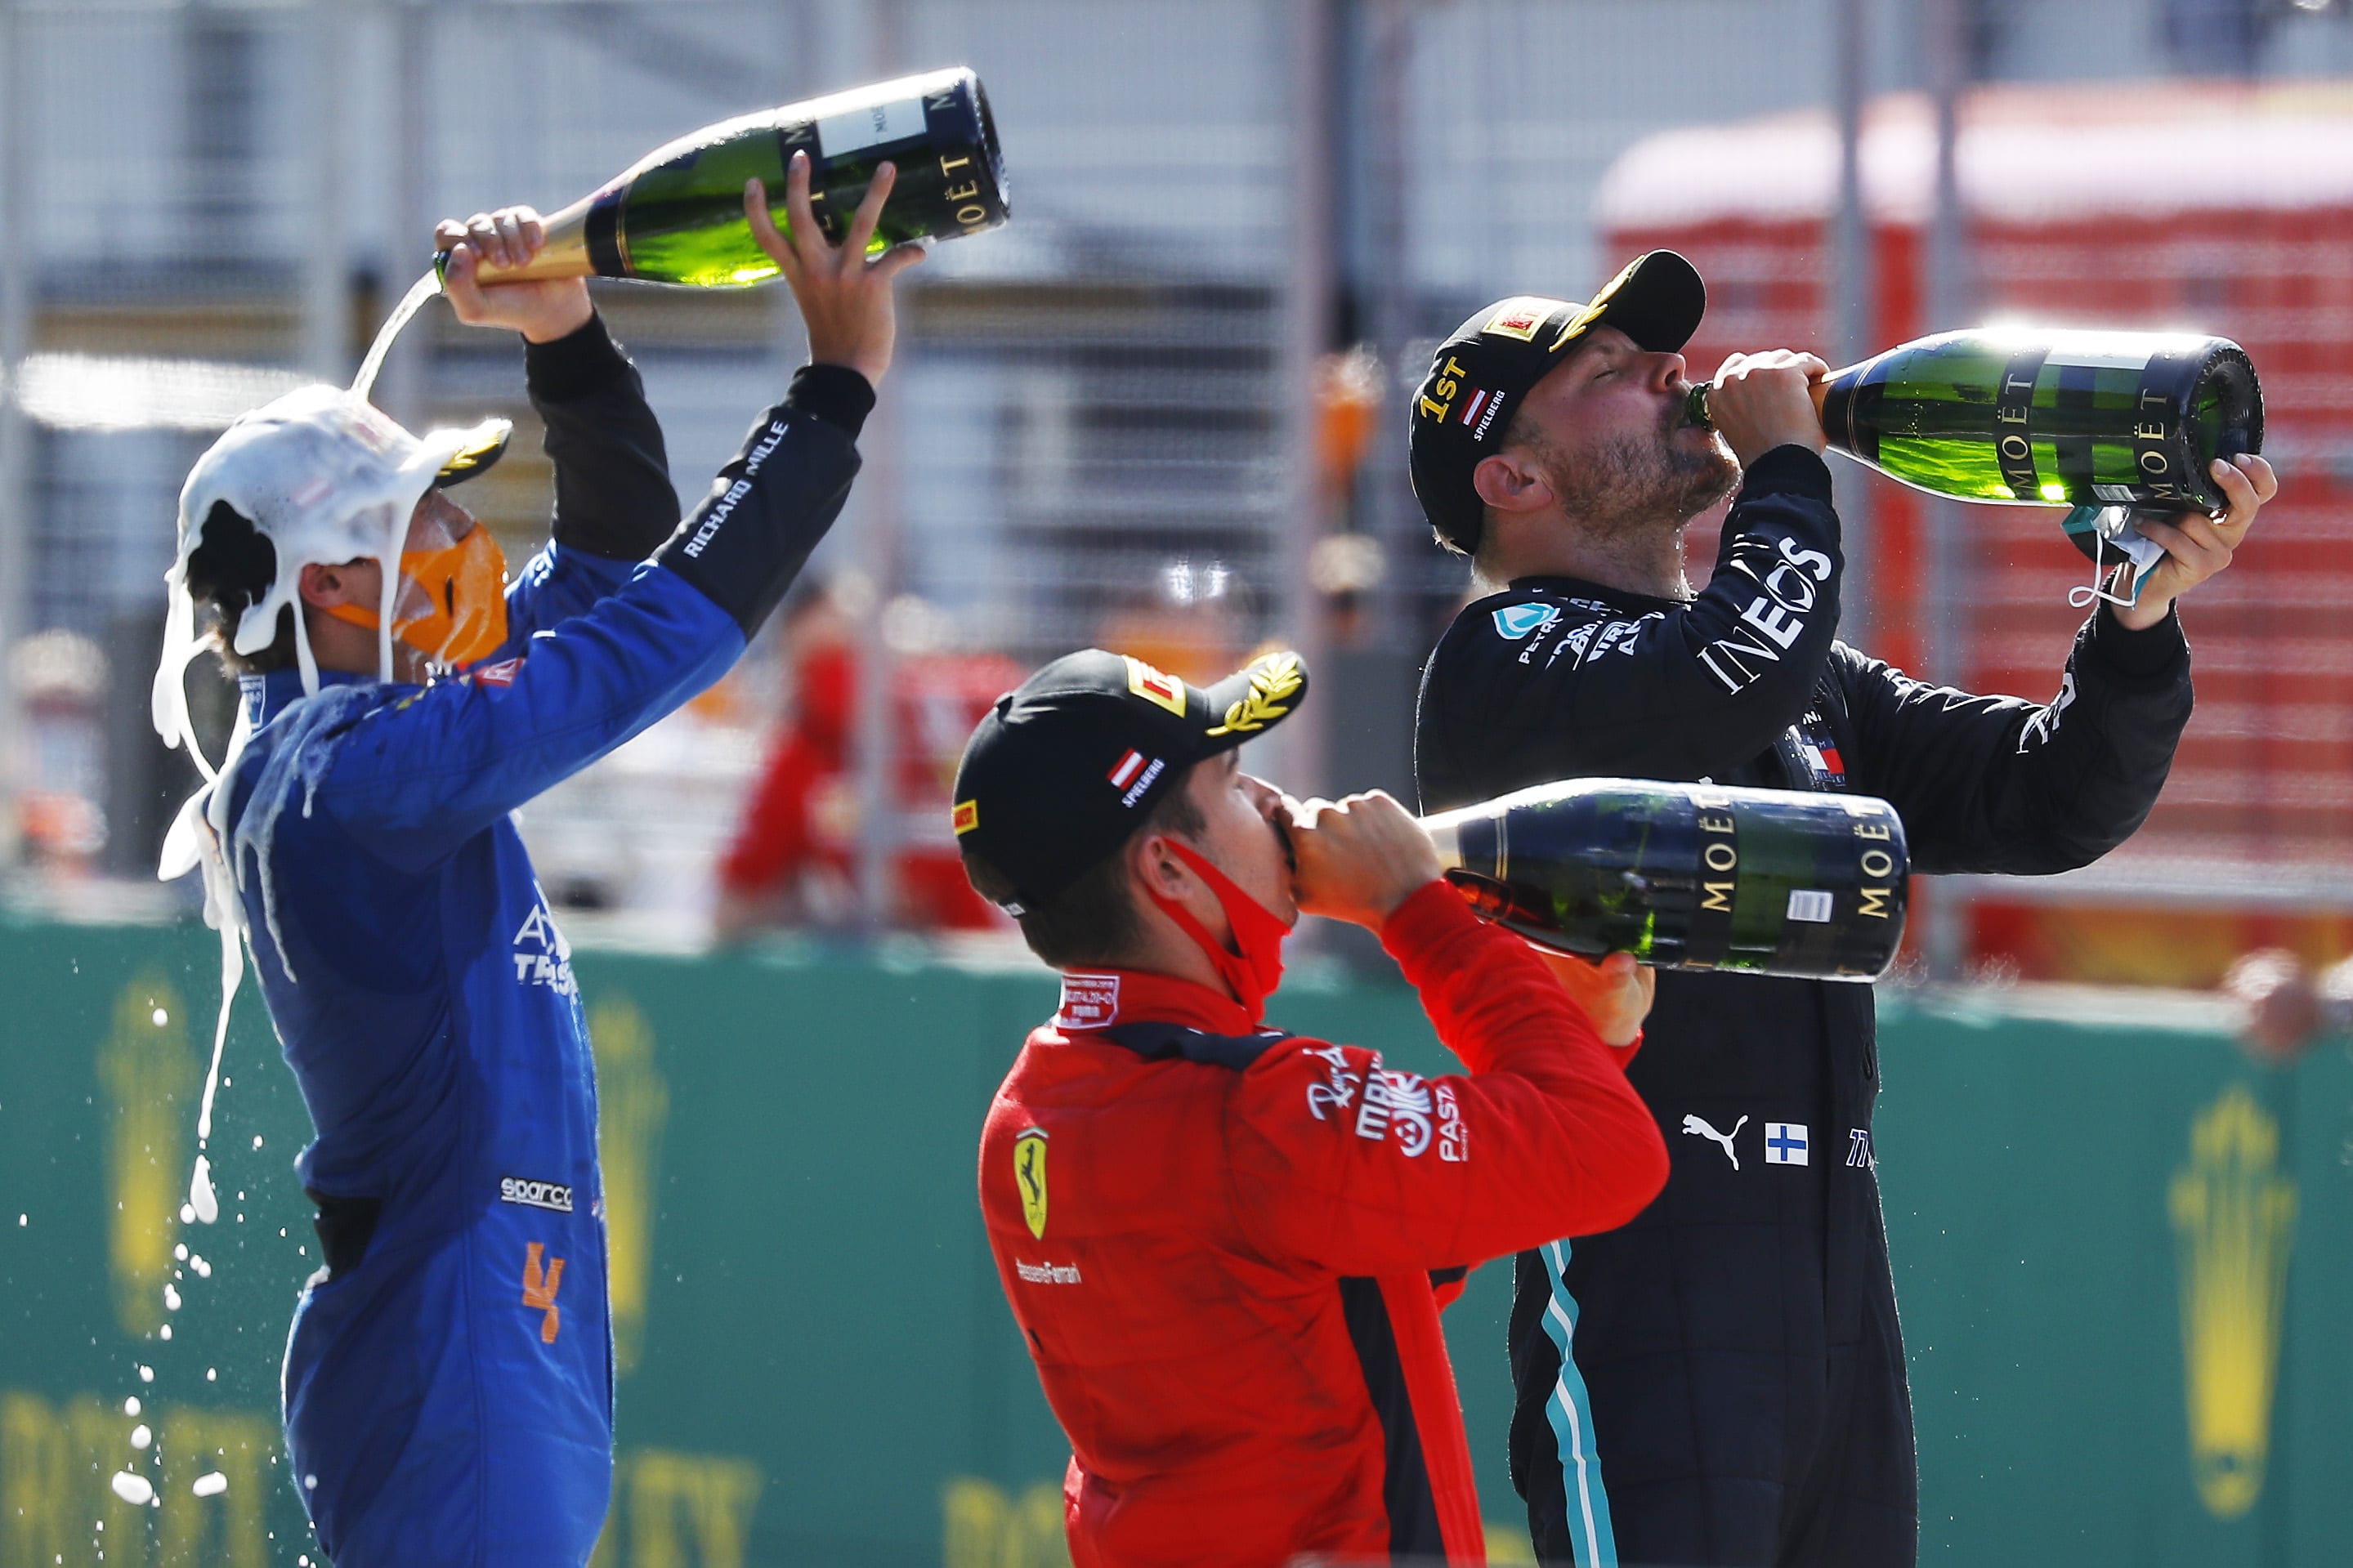 Austrian Grand Prix 2020 race report and highlights: Bottas beats Leclerc and Norris to win dramatic first race of 2020 as is Hamilton penalised | Formula 1®